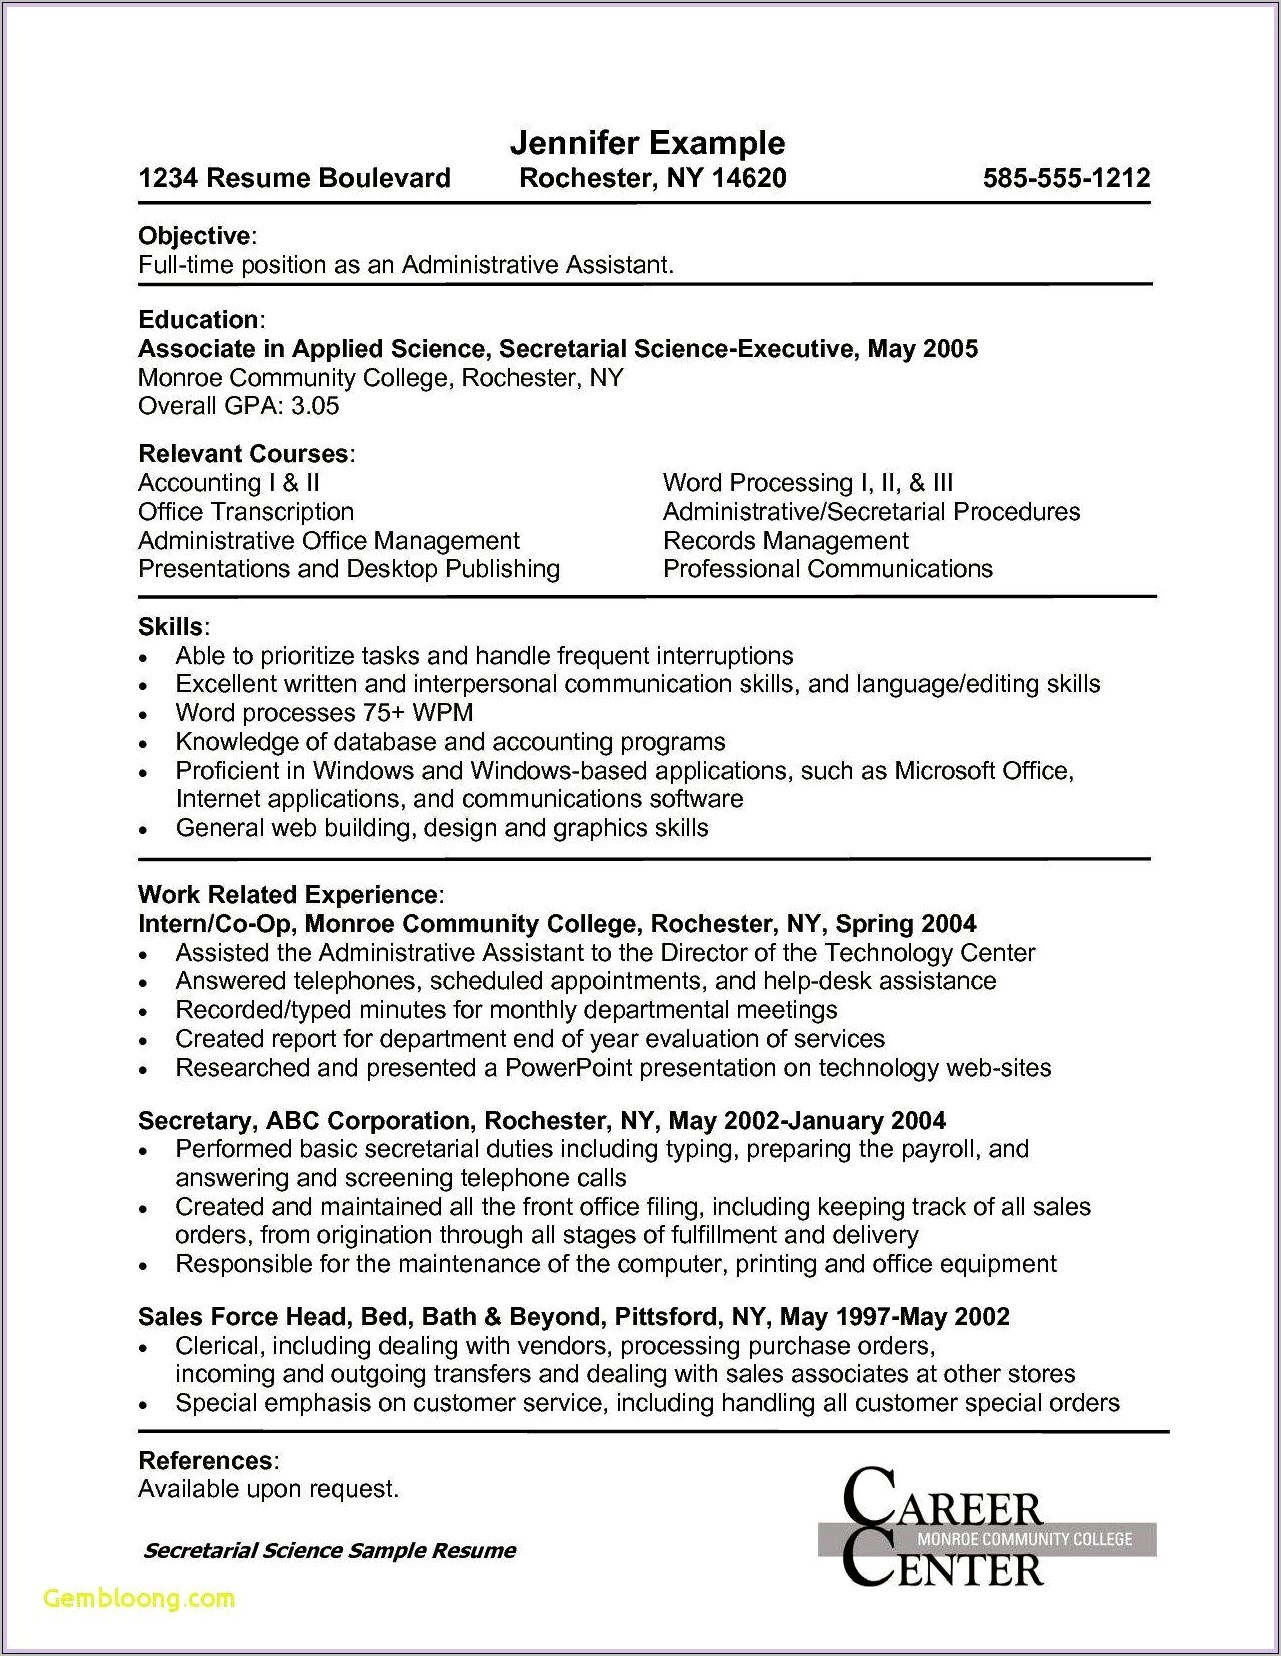 Examples Of Resume Headline For Administrative Assistant